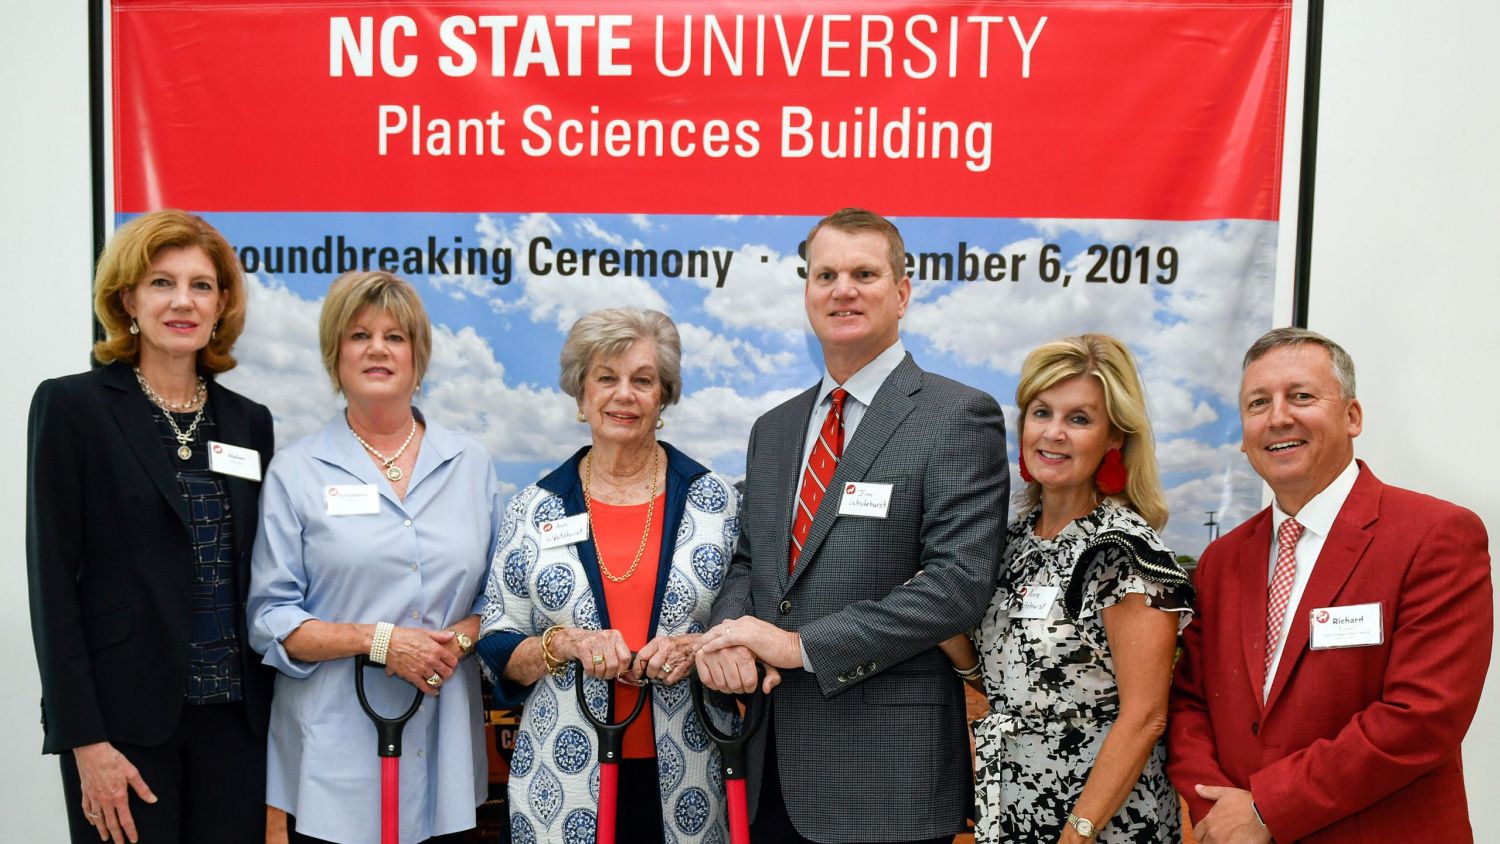 Jim Whitehurst and family celebrate the groundbreaking for the NC State University Plant Sciences Building